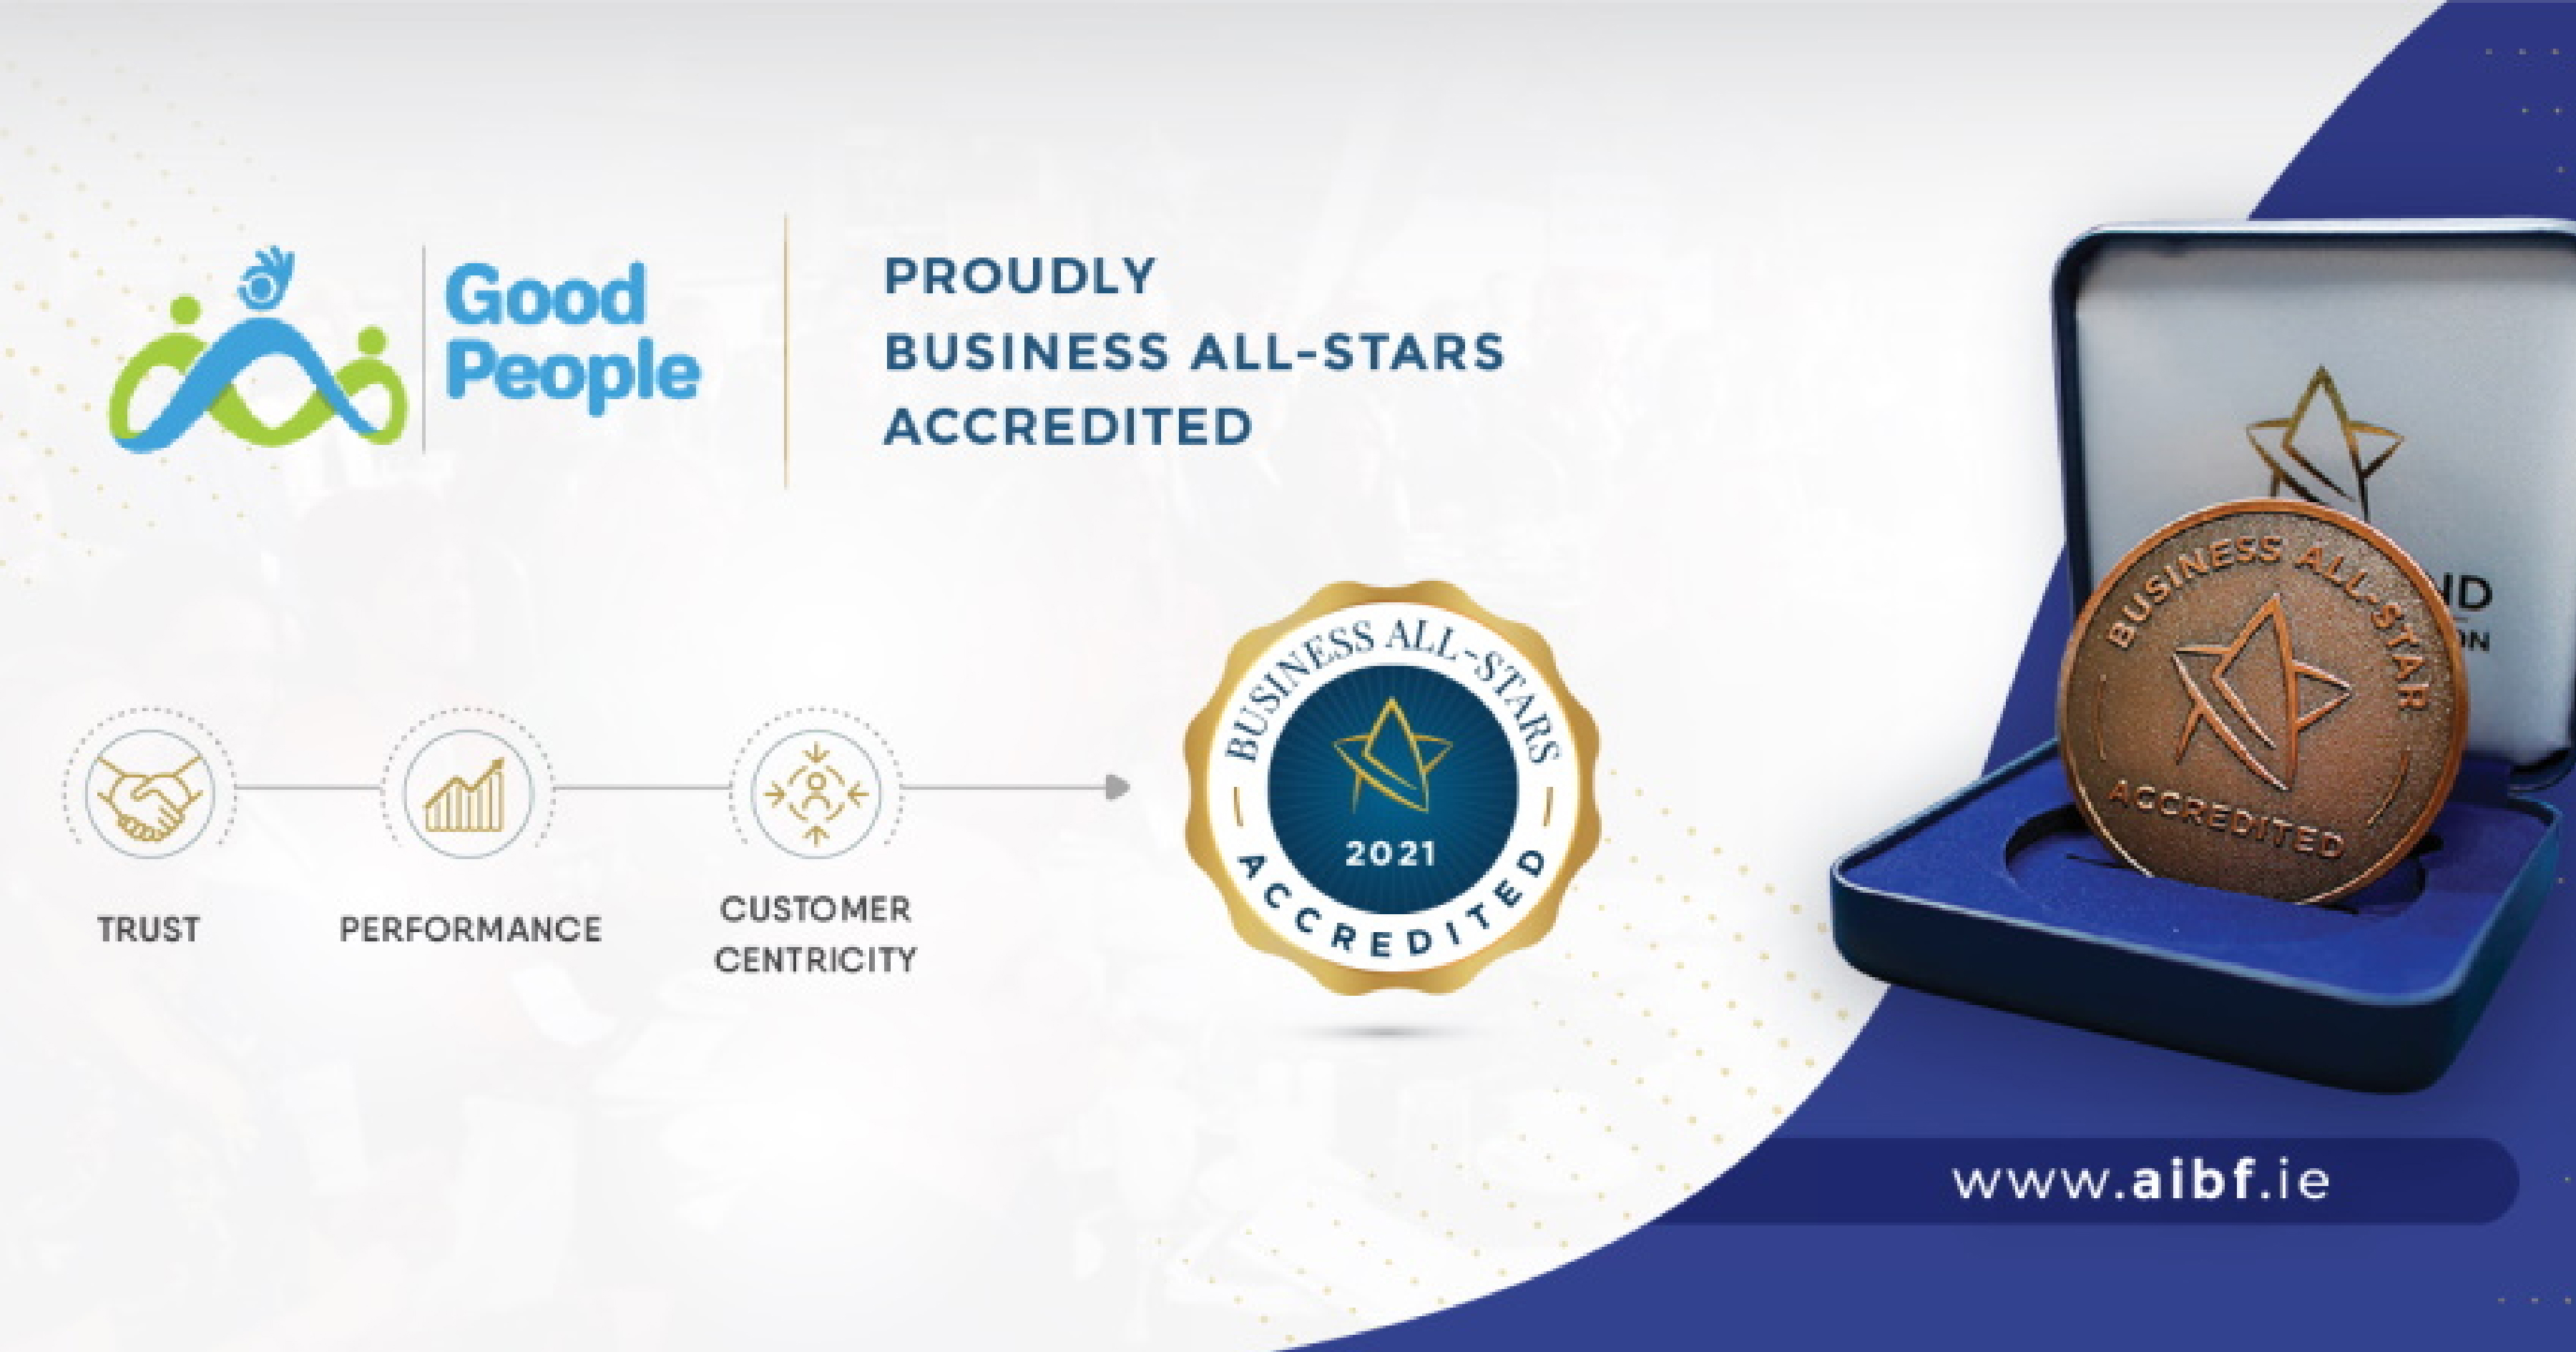 Business All-Stars Accreditation from AIBF